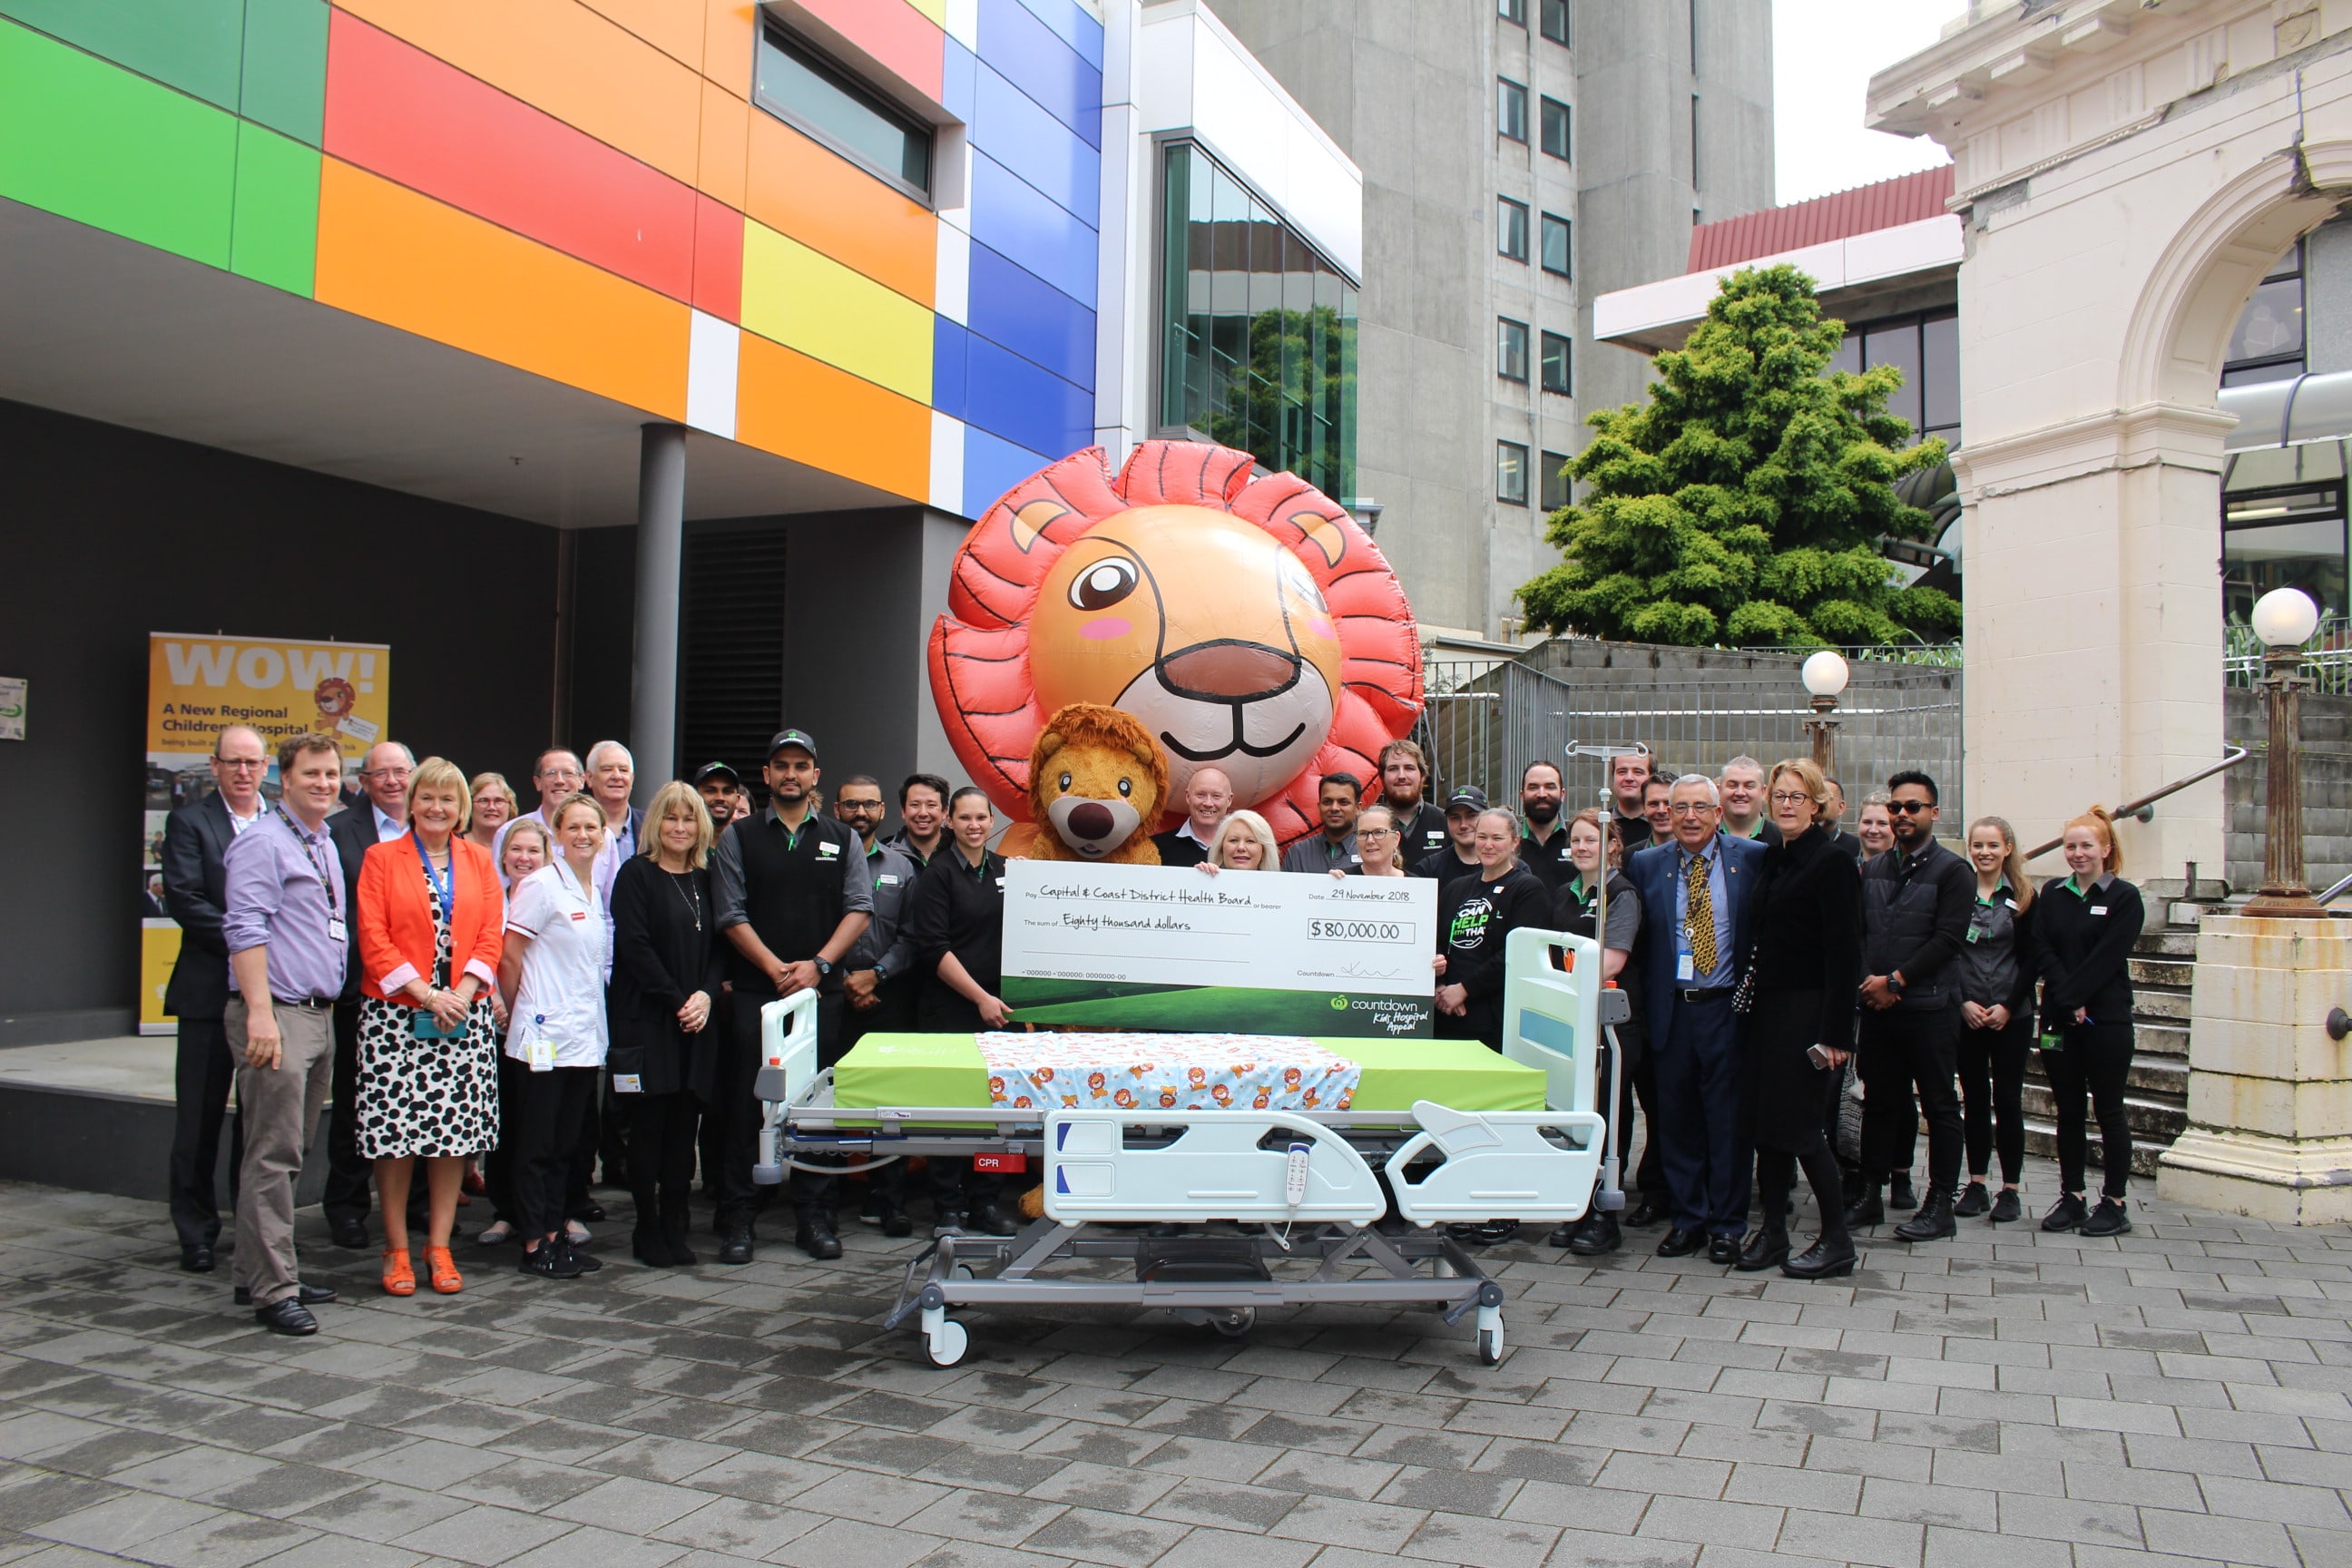 Countdown and Wellington Children's Hospital staff present the cheque